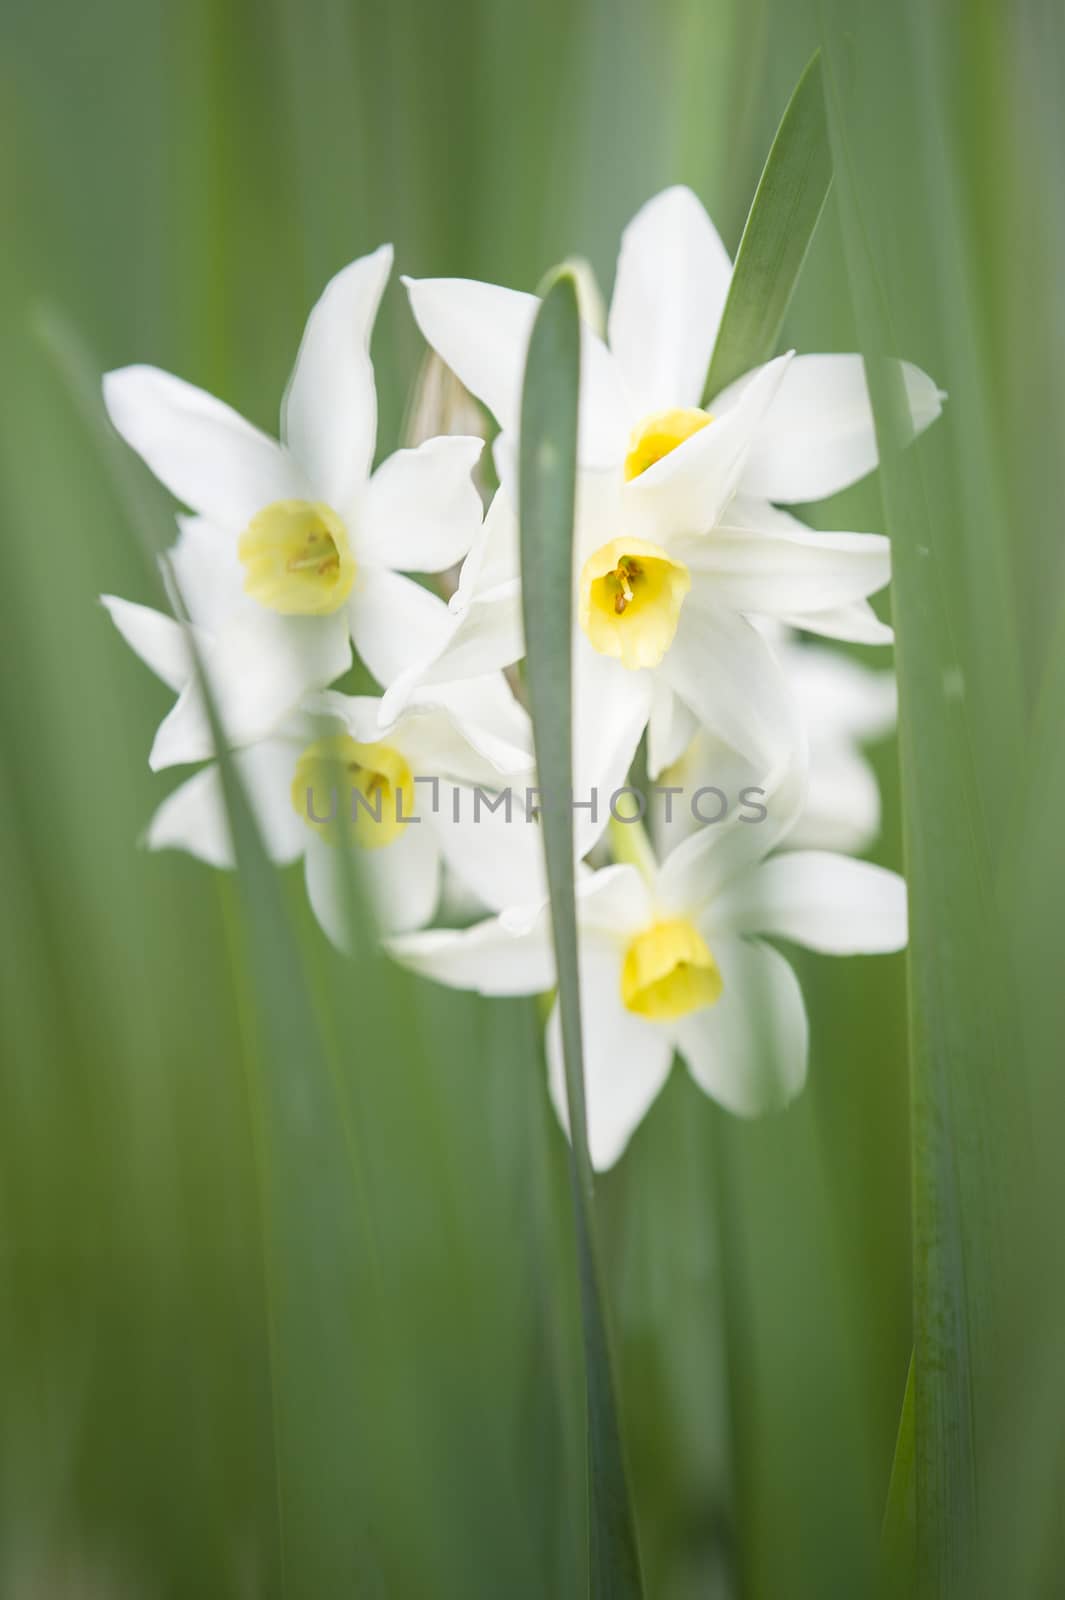 Yellow and white daffodil flowers in full bloom